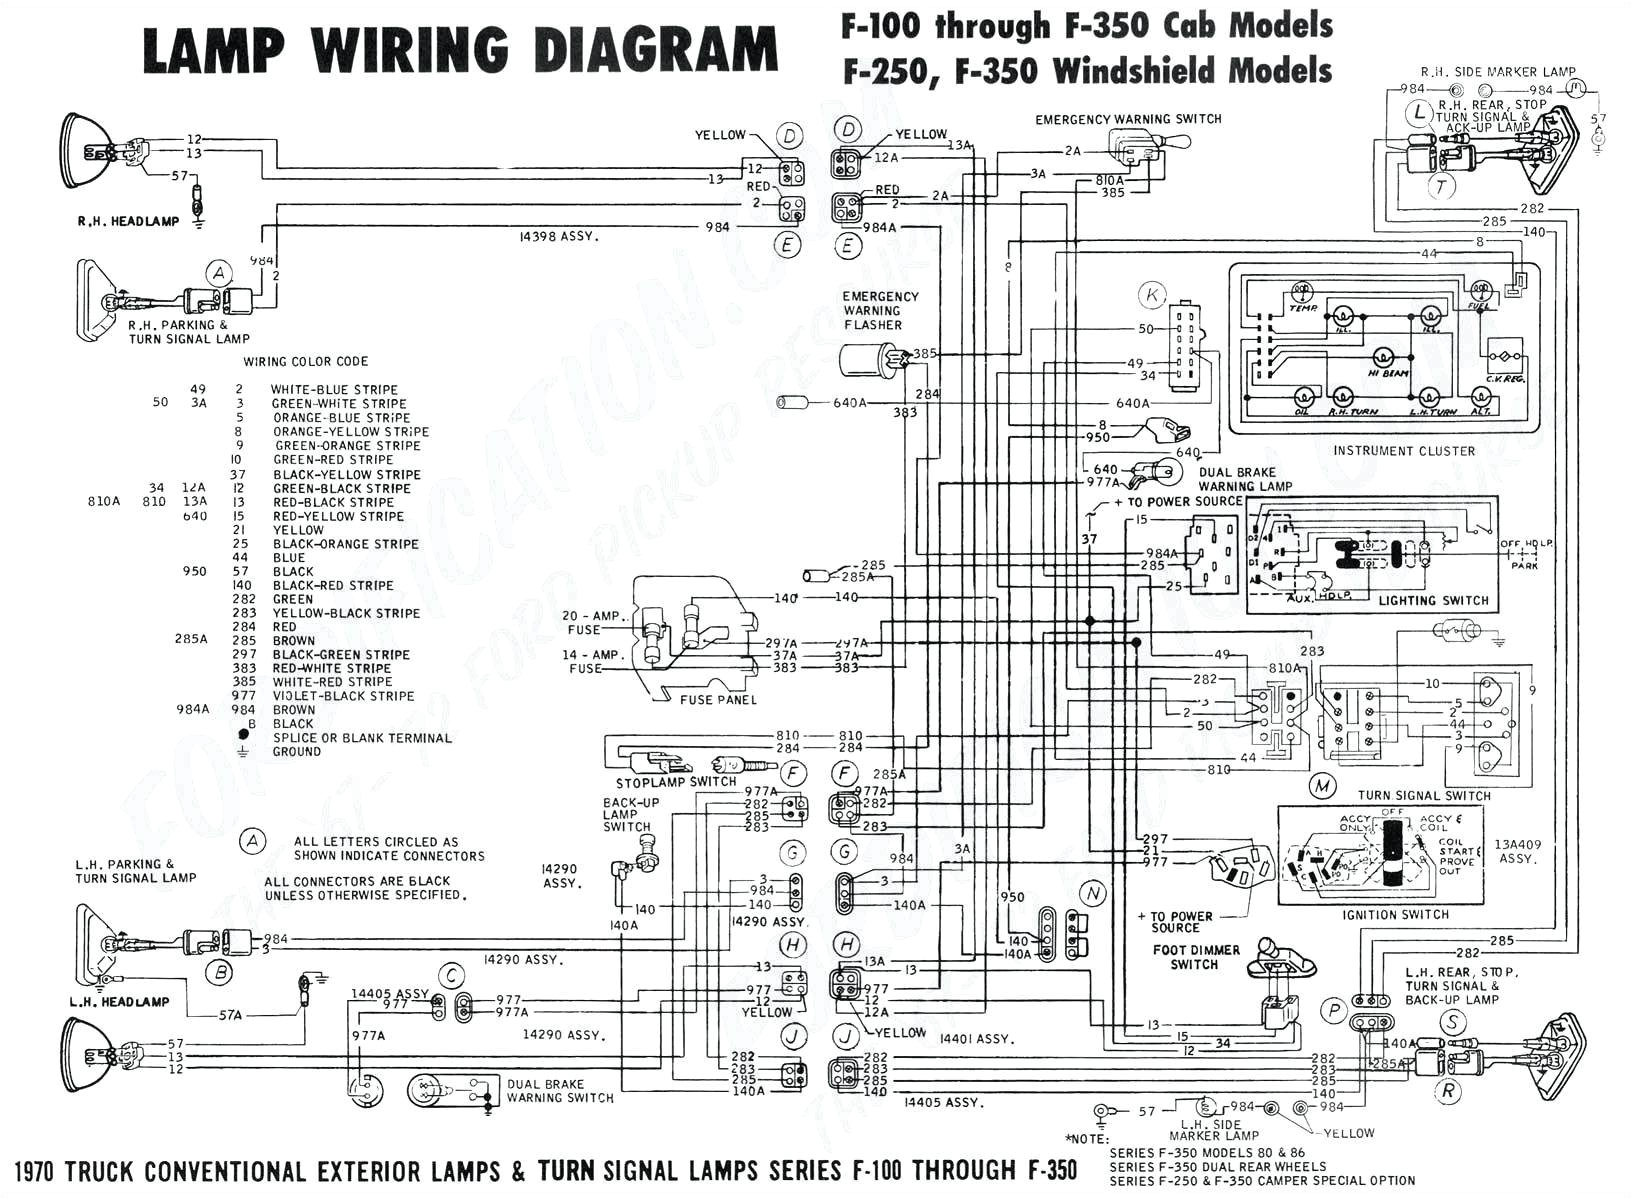 free download gax30 wiring diagram another blog about wiring diagram free download gax30 wiring diagram